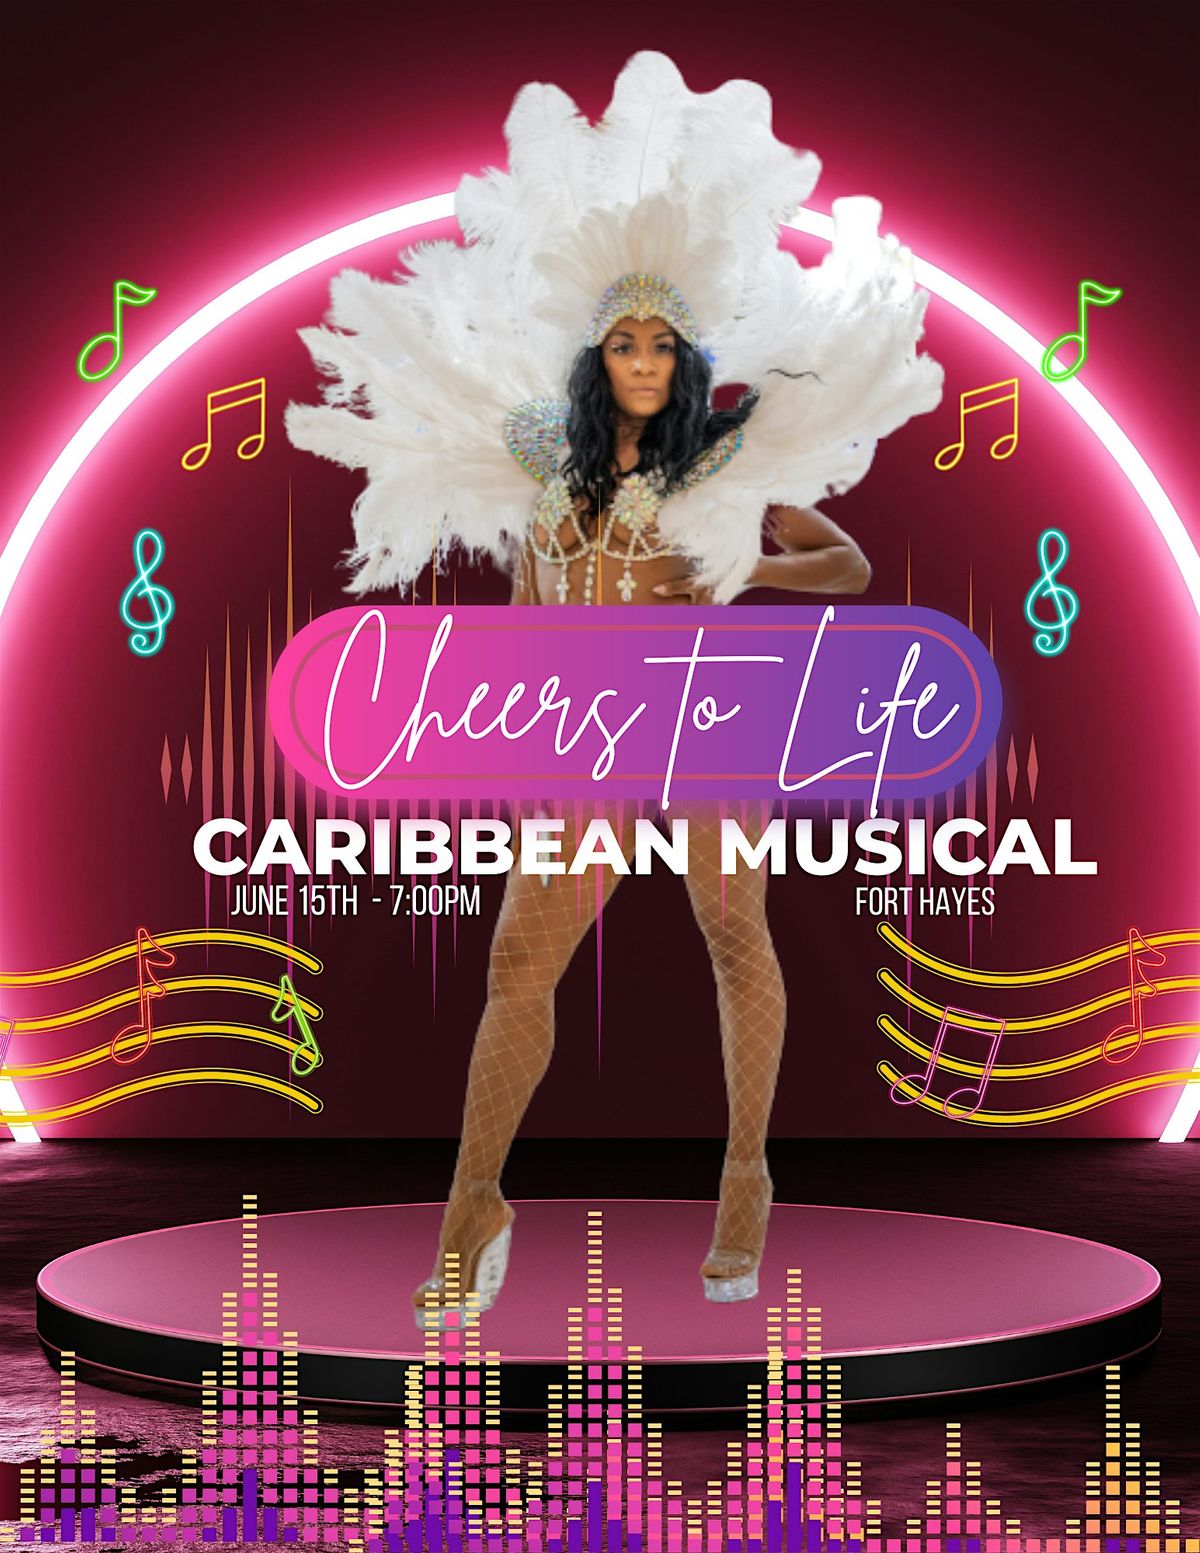 Cheers to Life: Caribbean Musical